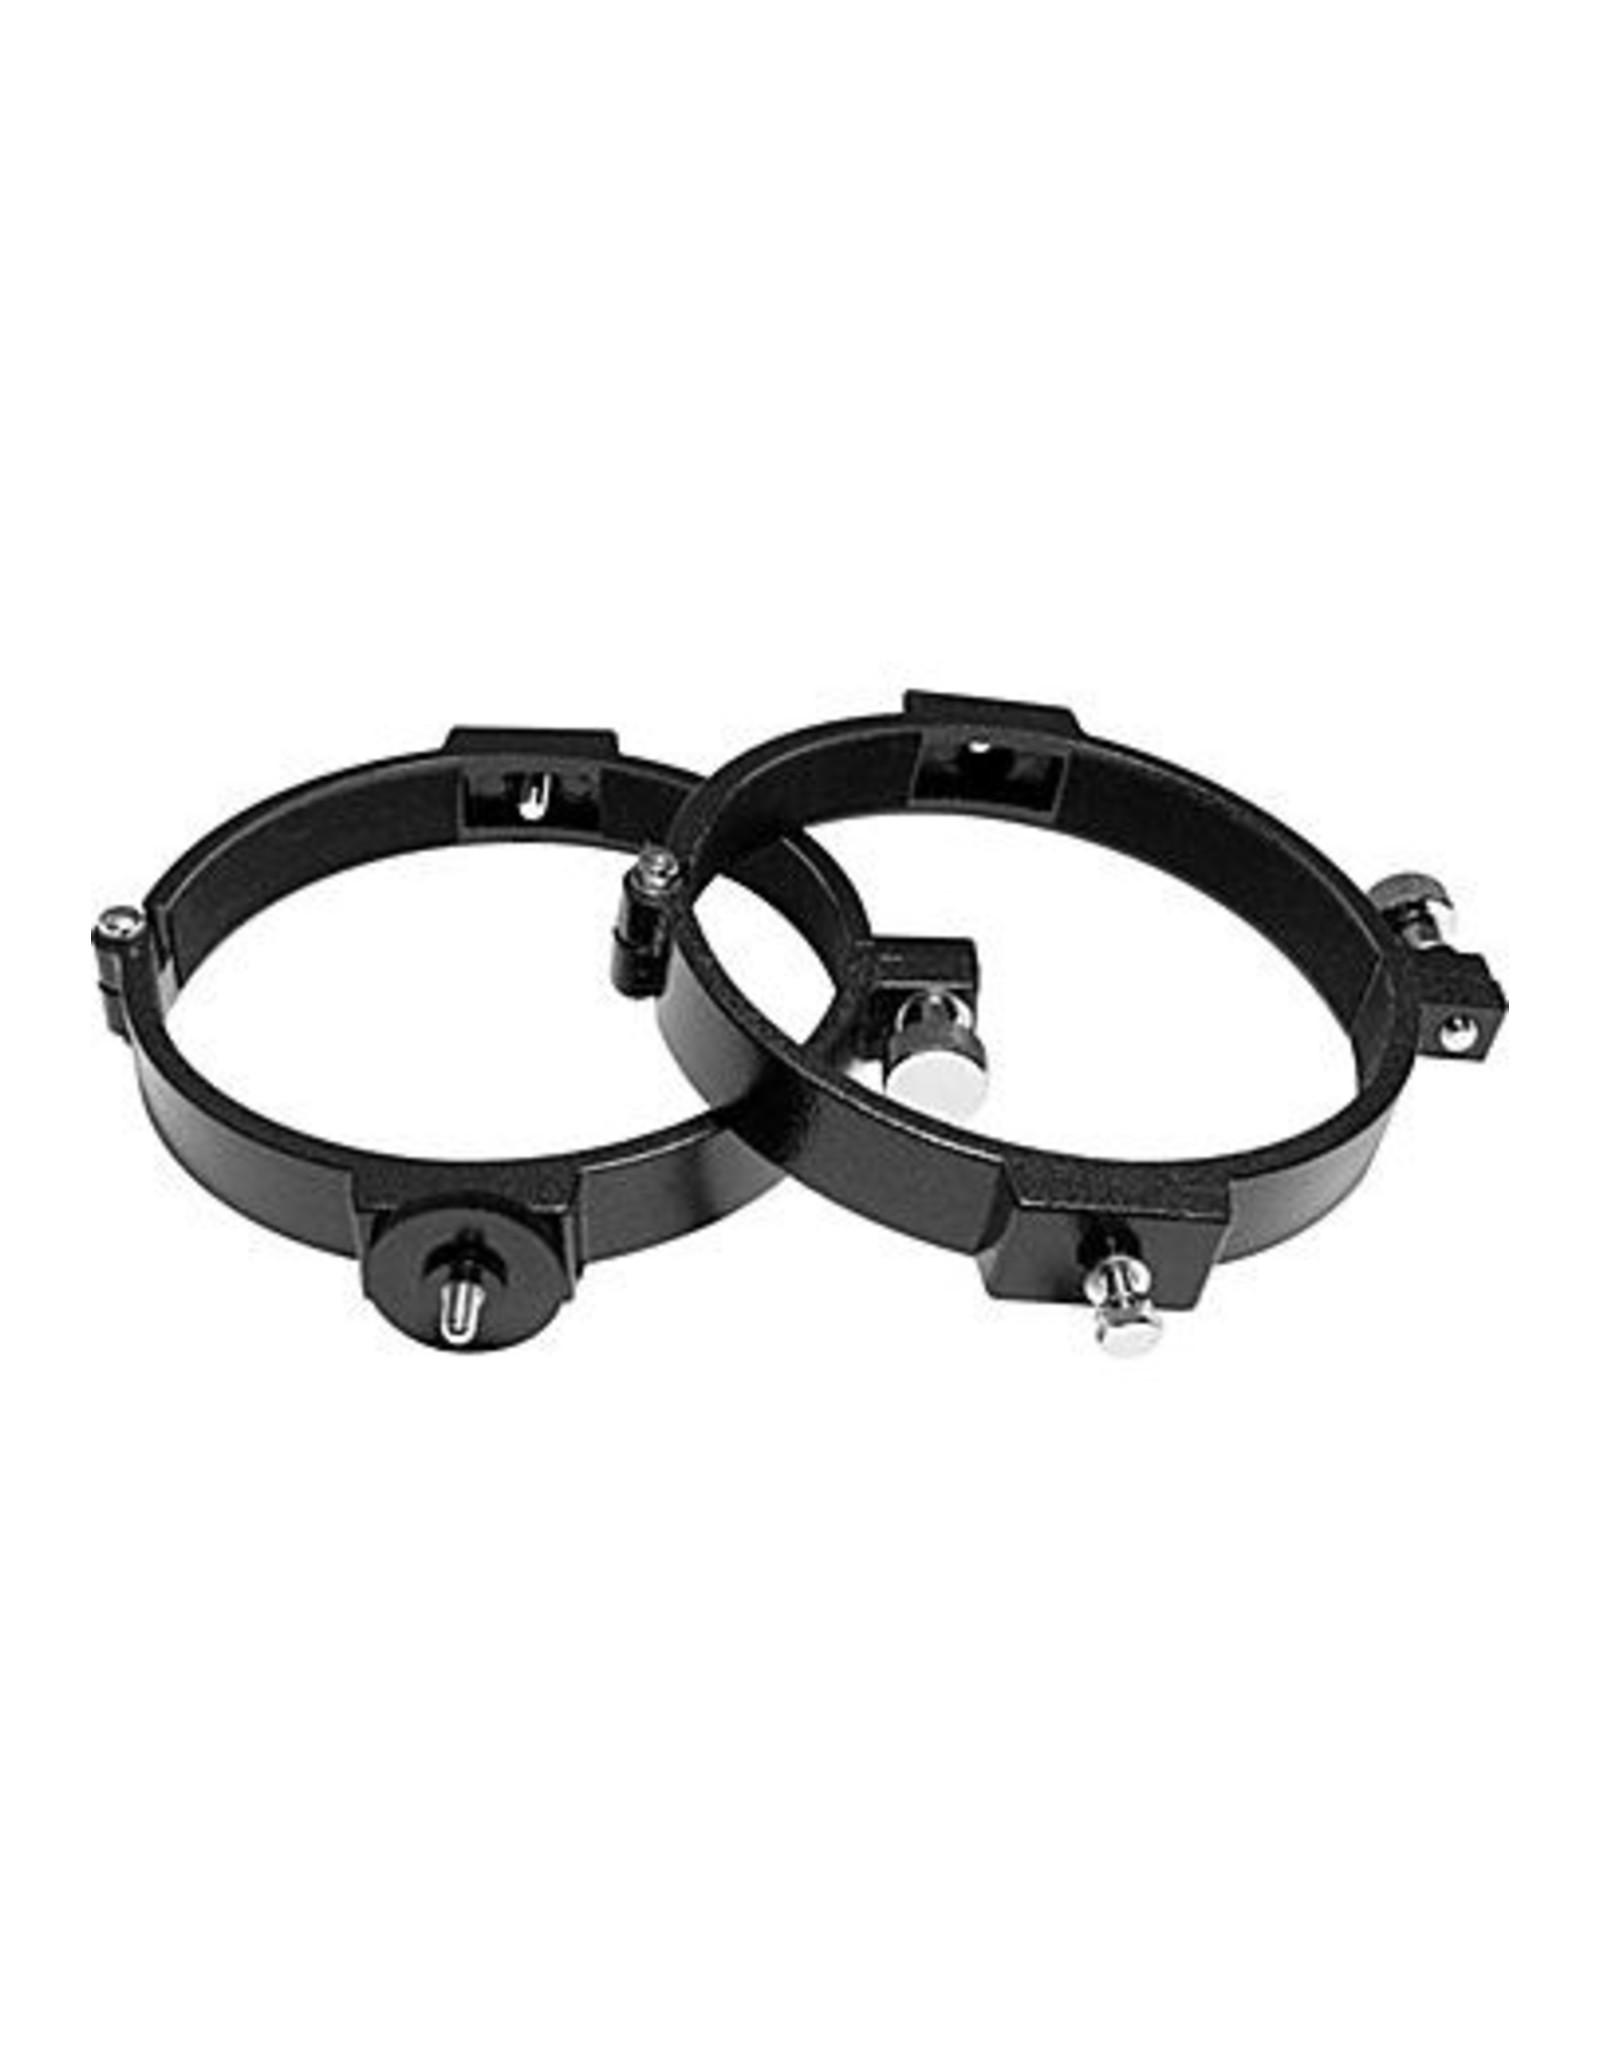 Orion Orion 144mm ID Telescope Tube Mounting Rings - Camera Concepts Telescope Tube Mounting Rings